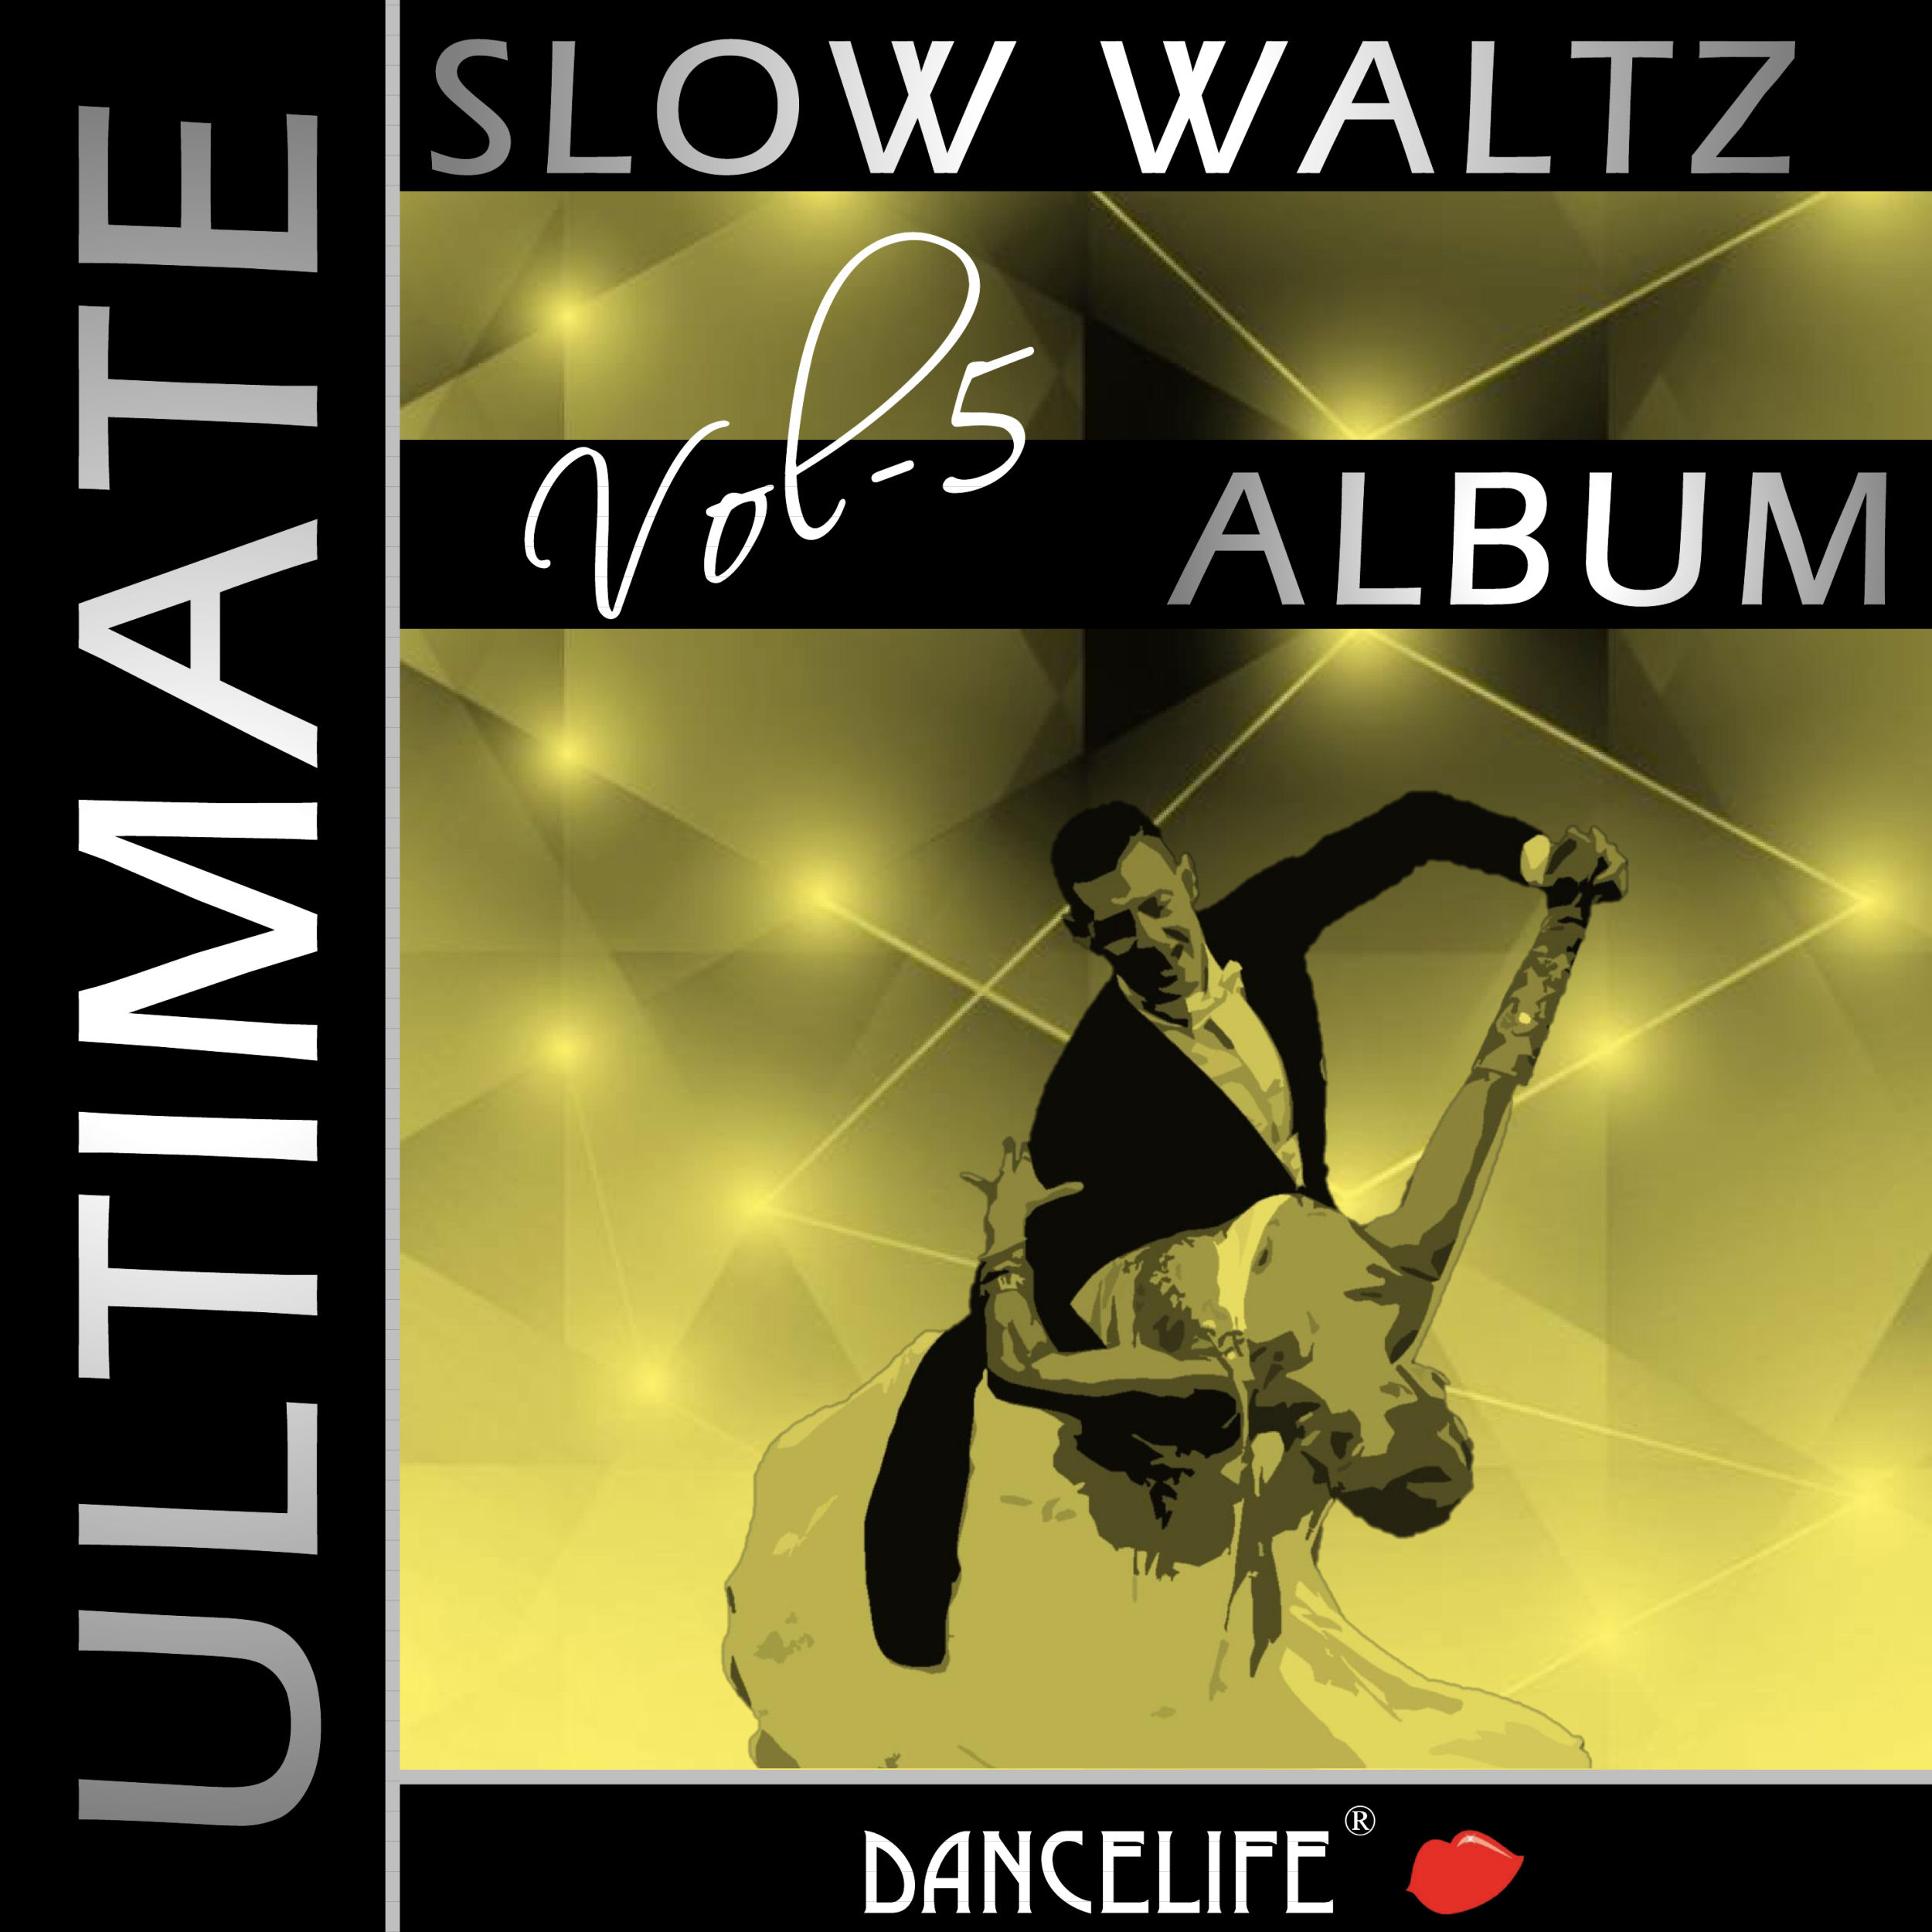 Play the Game of Love (Slow Waltz / 87 Bpm)